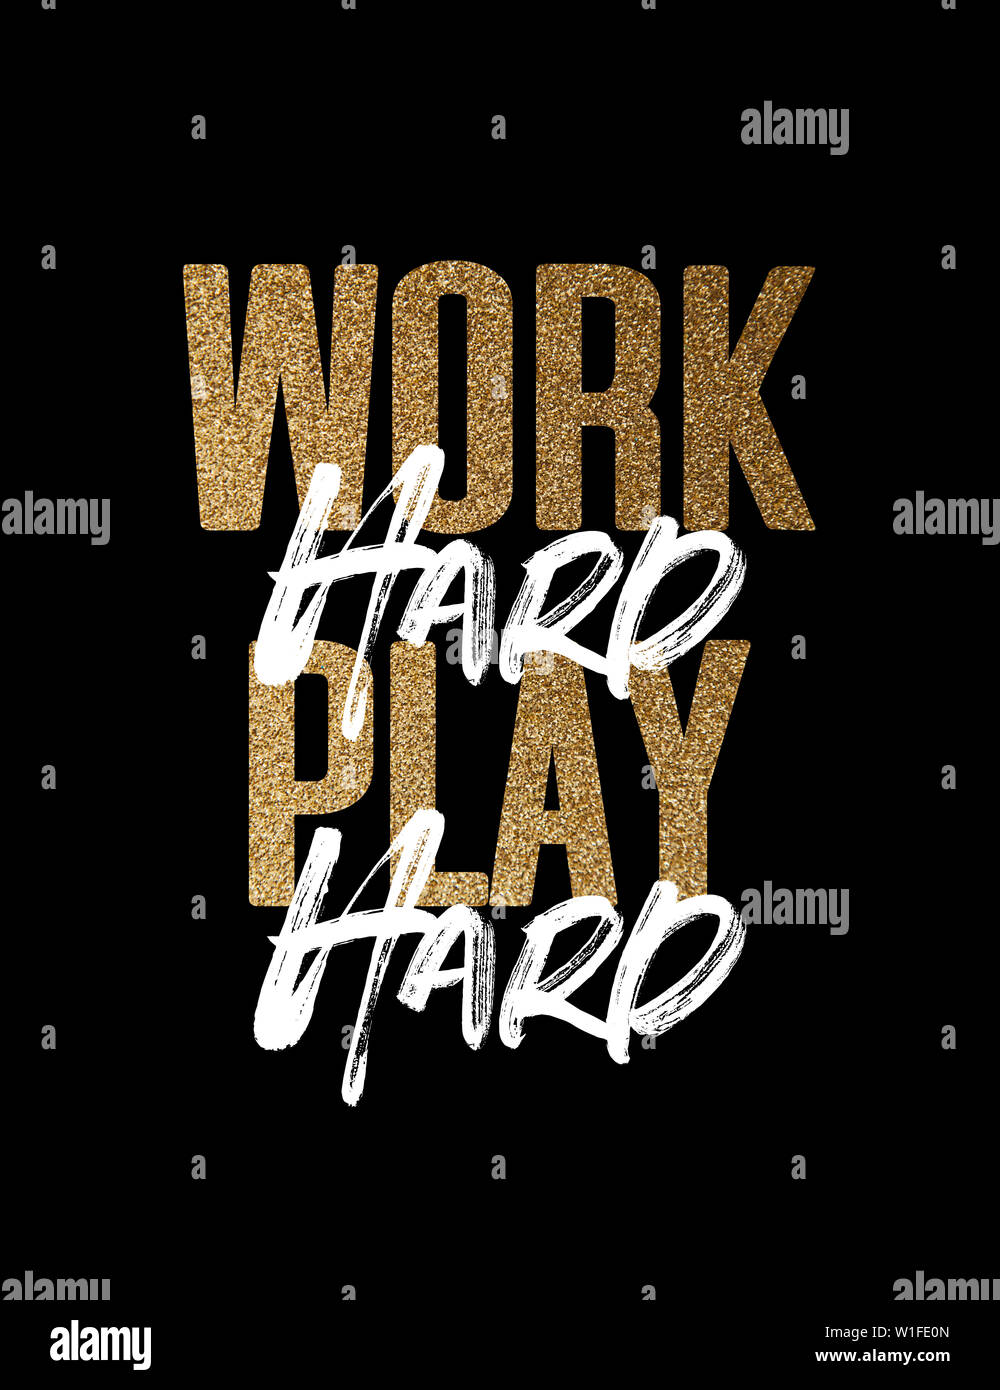 Work Hard Play Hard Gold And White Inspirational Motivation Quote Stock Photo Alamy